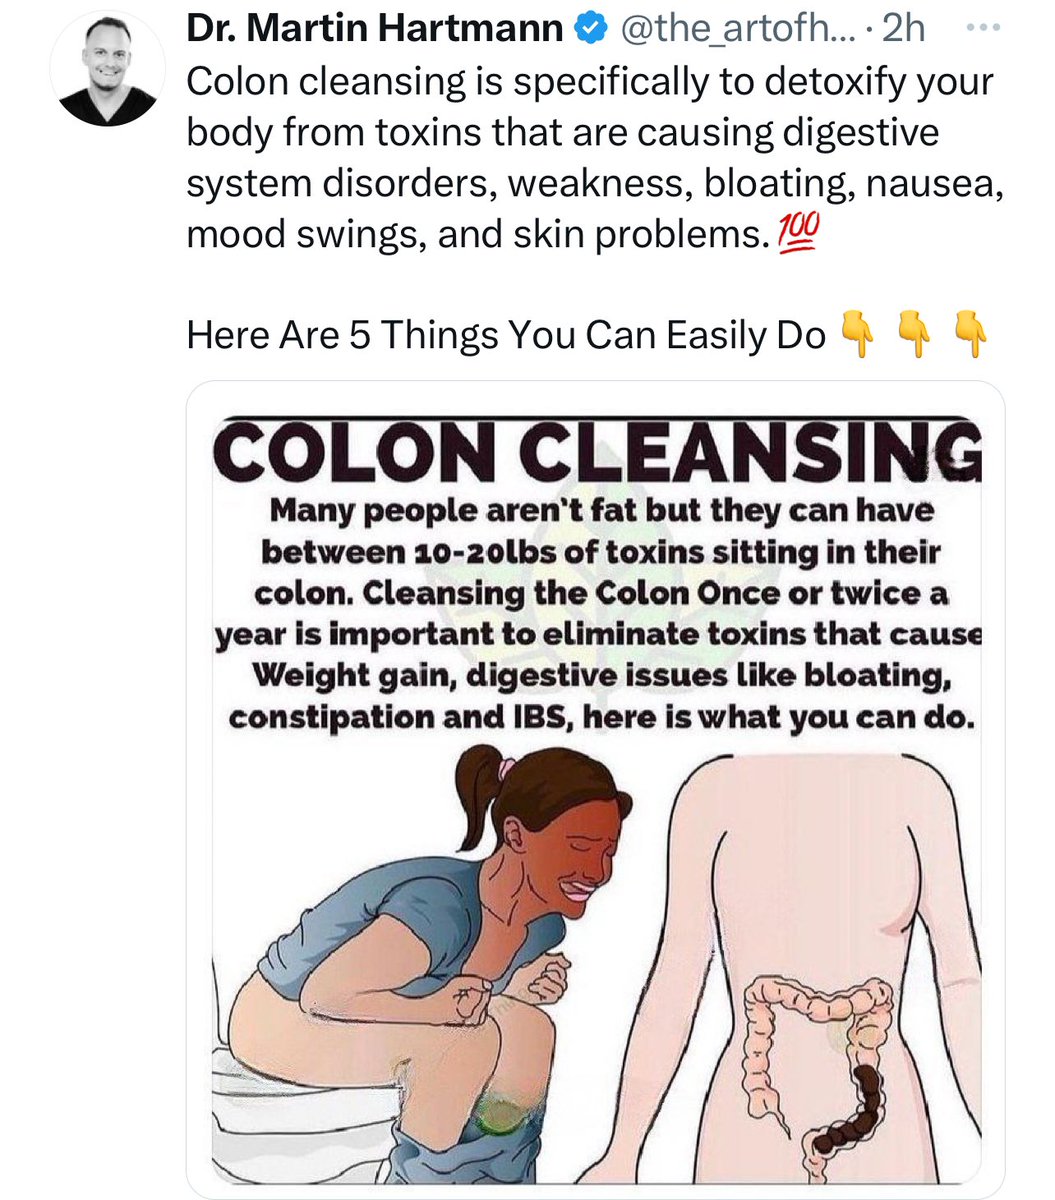 Colons do not need cleansing 🤦🏻‍♂️